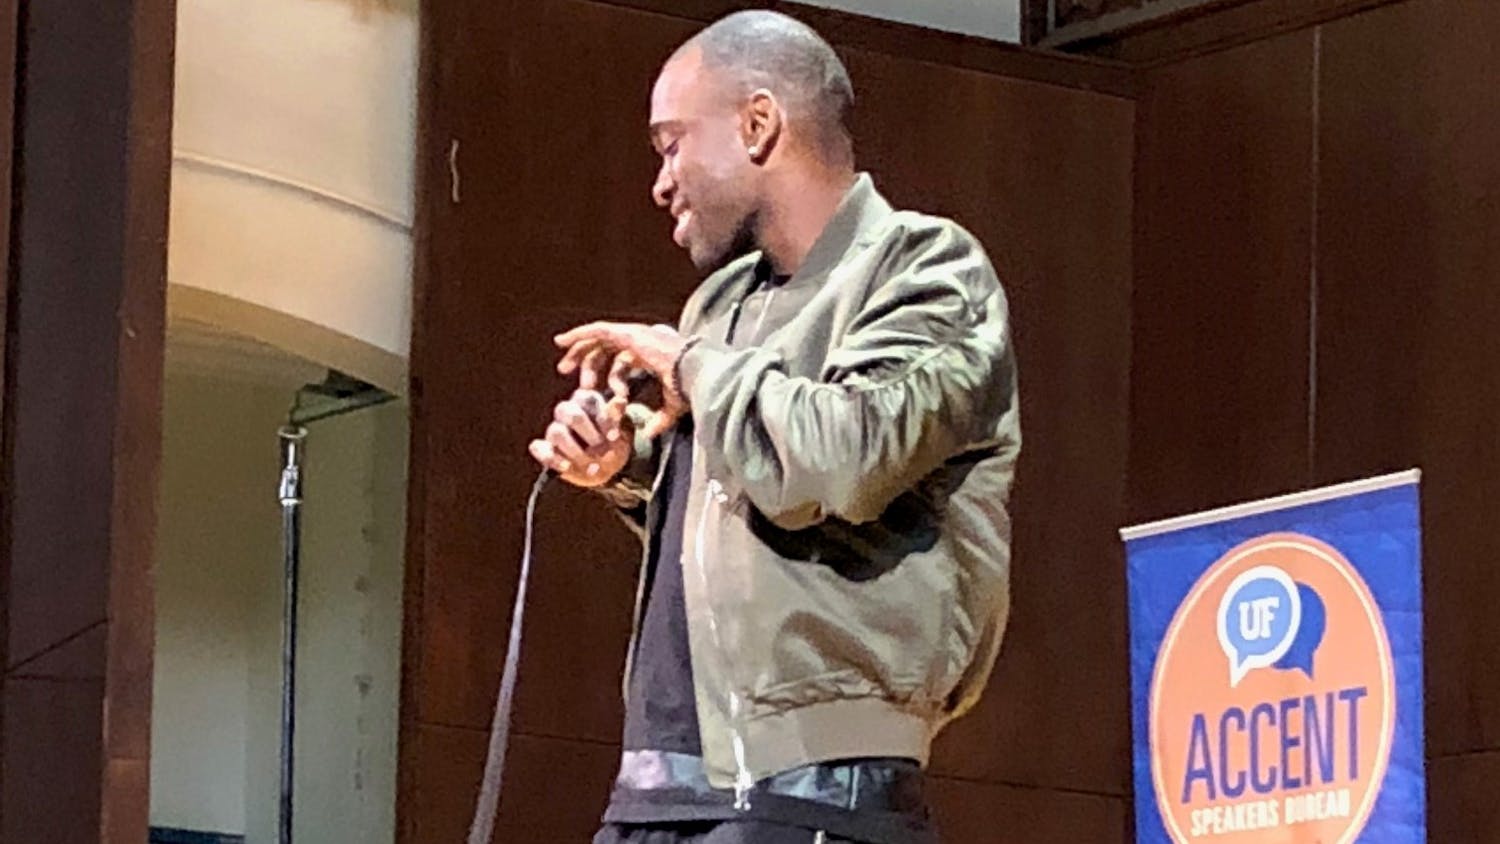 Jay Pharoah performed an hour-long comedy act for 850 attendees at University Auditorium on Tuesday.